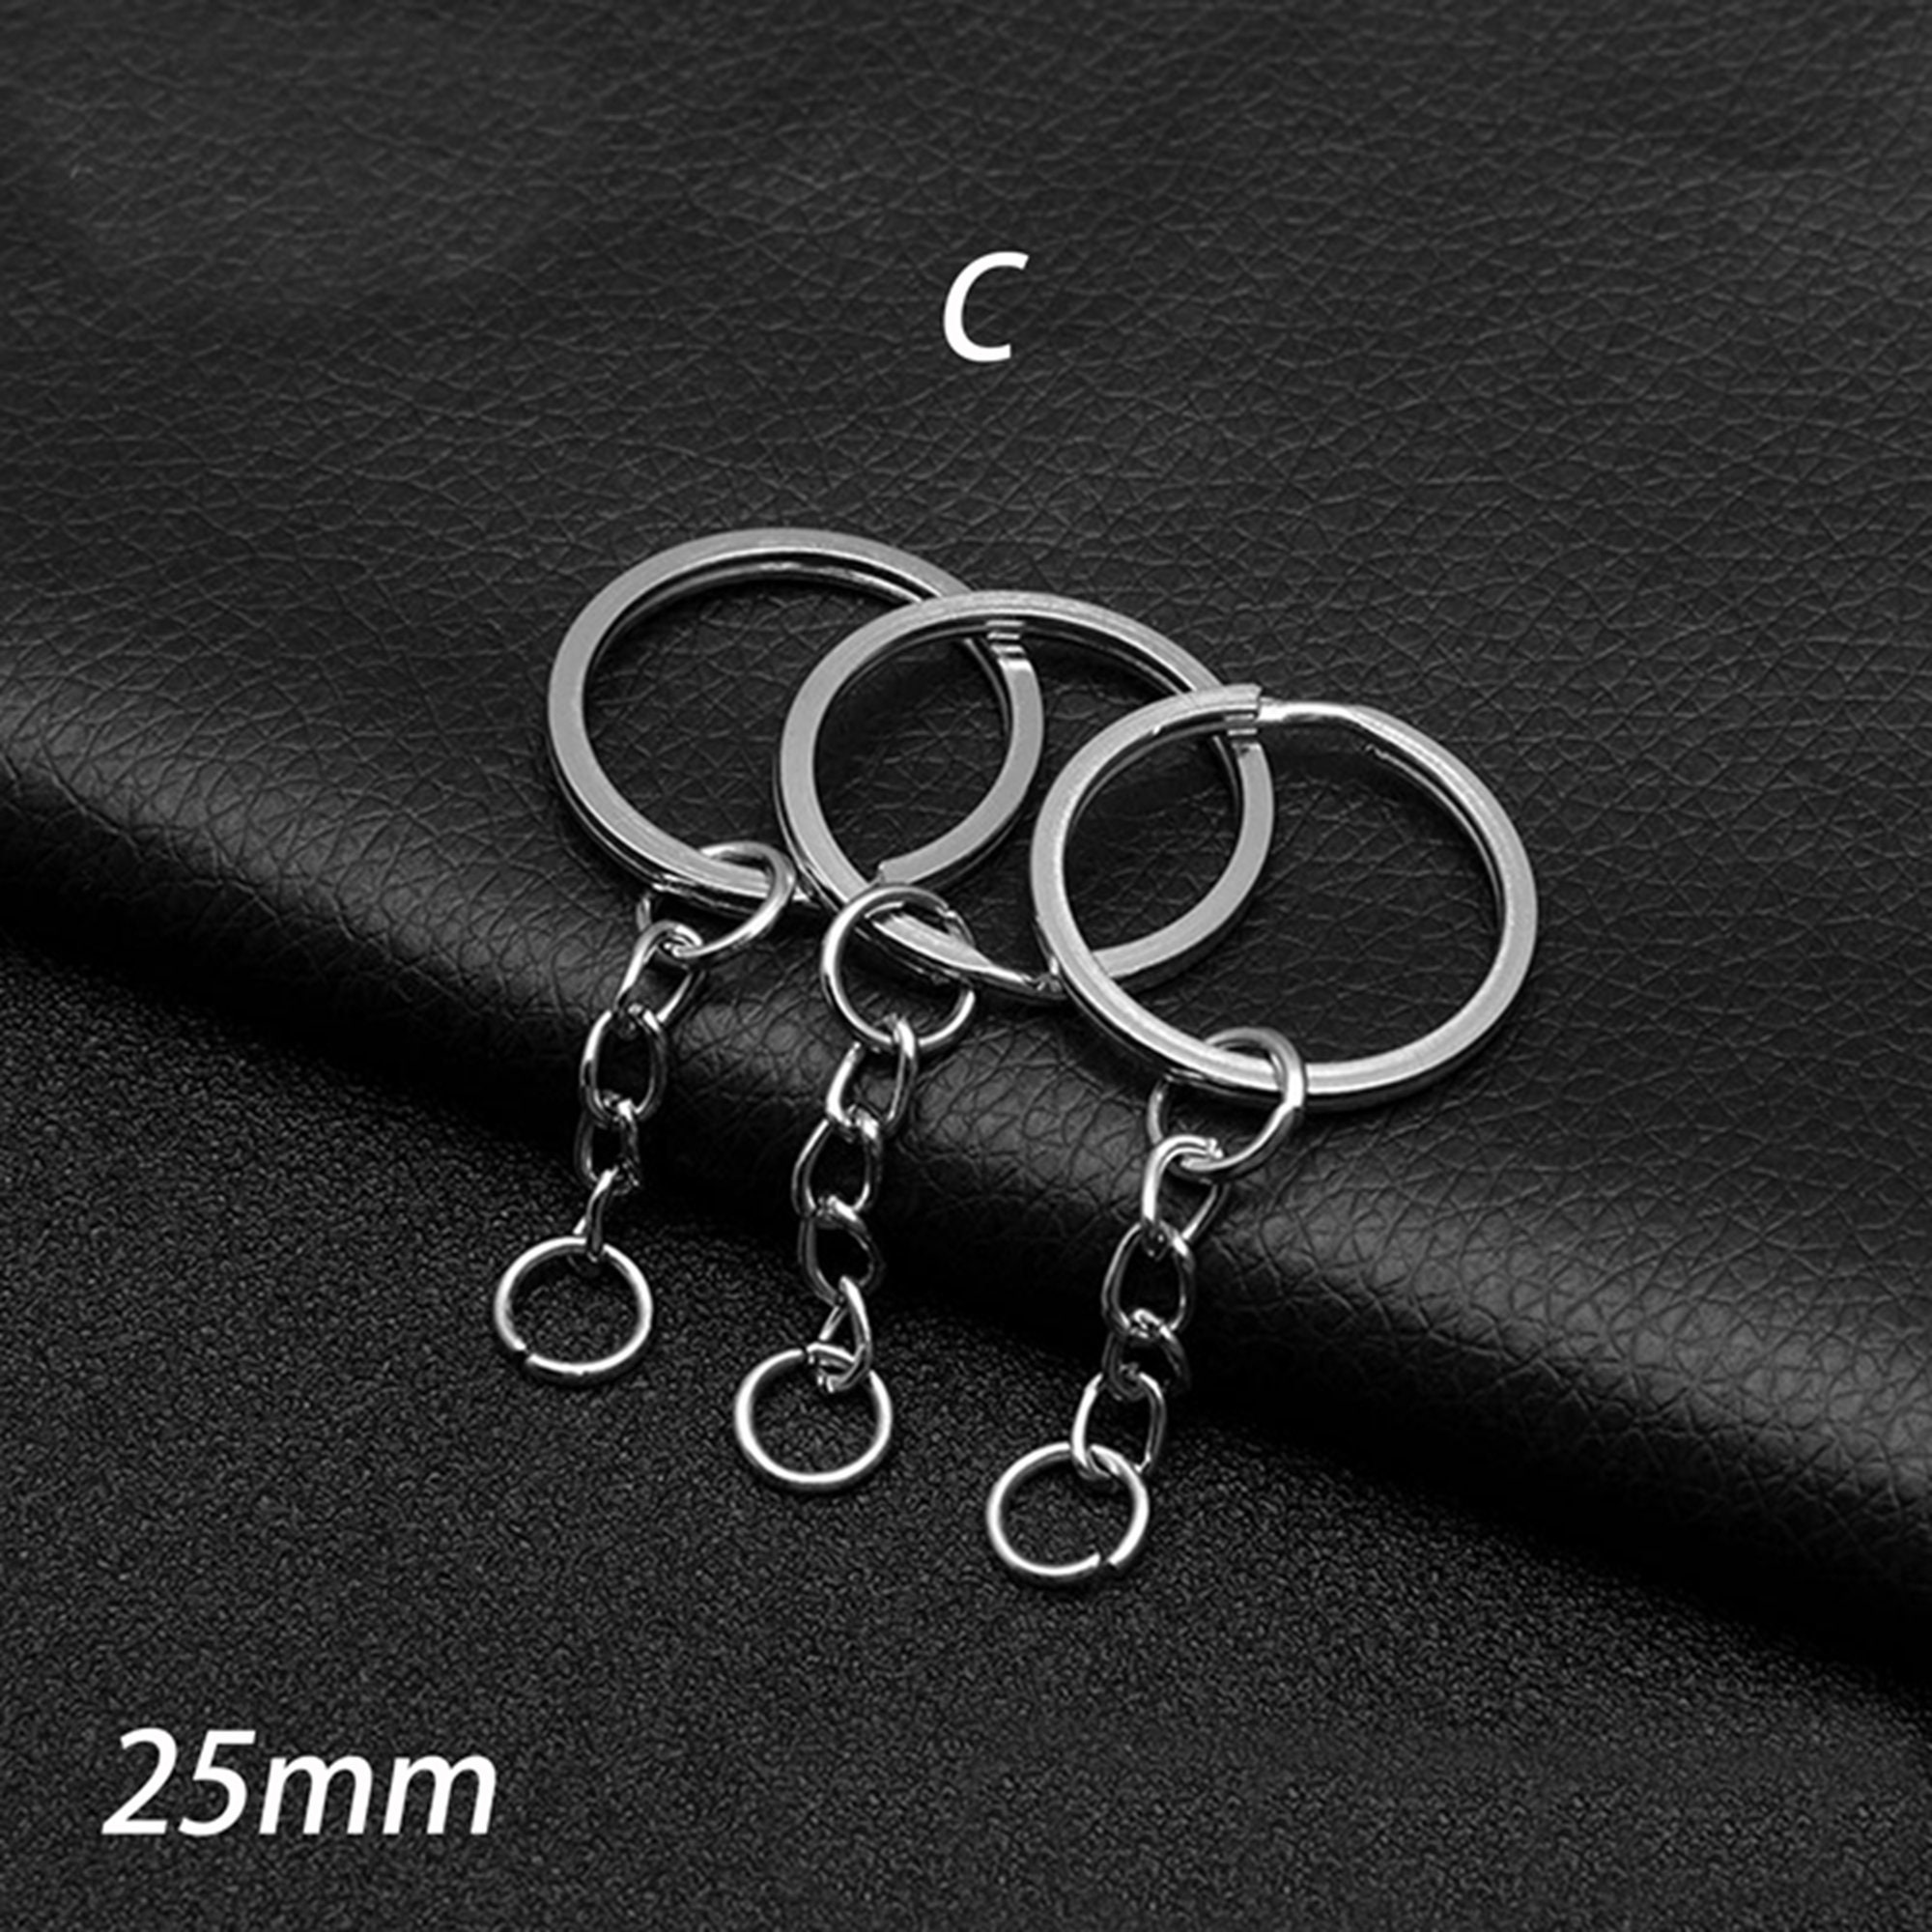 Manufacturer of Keychain Ring and Metal chain - Pummi Enterprises leading  manufacturer and supplier of Keychain Rings & Metal Chains. Buy in Bulk  Only. Buy All Types of Keychain ring • Flat